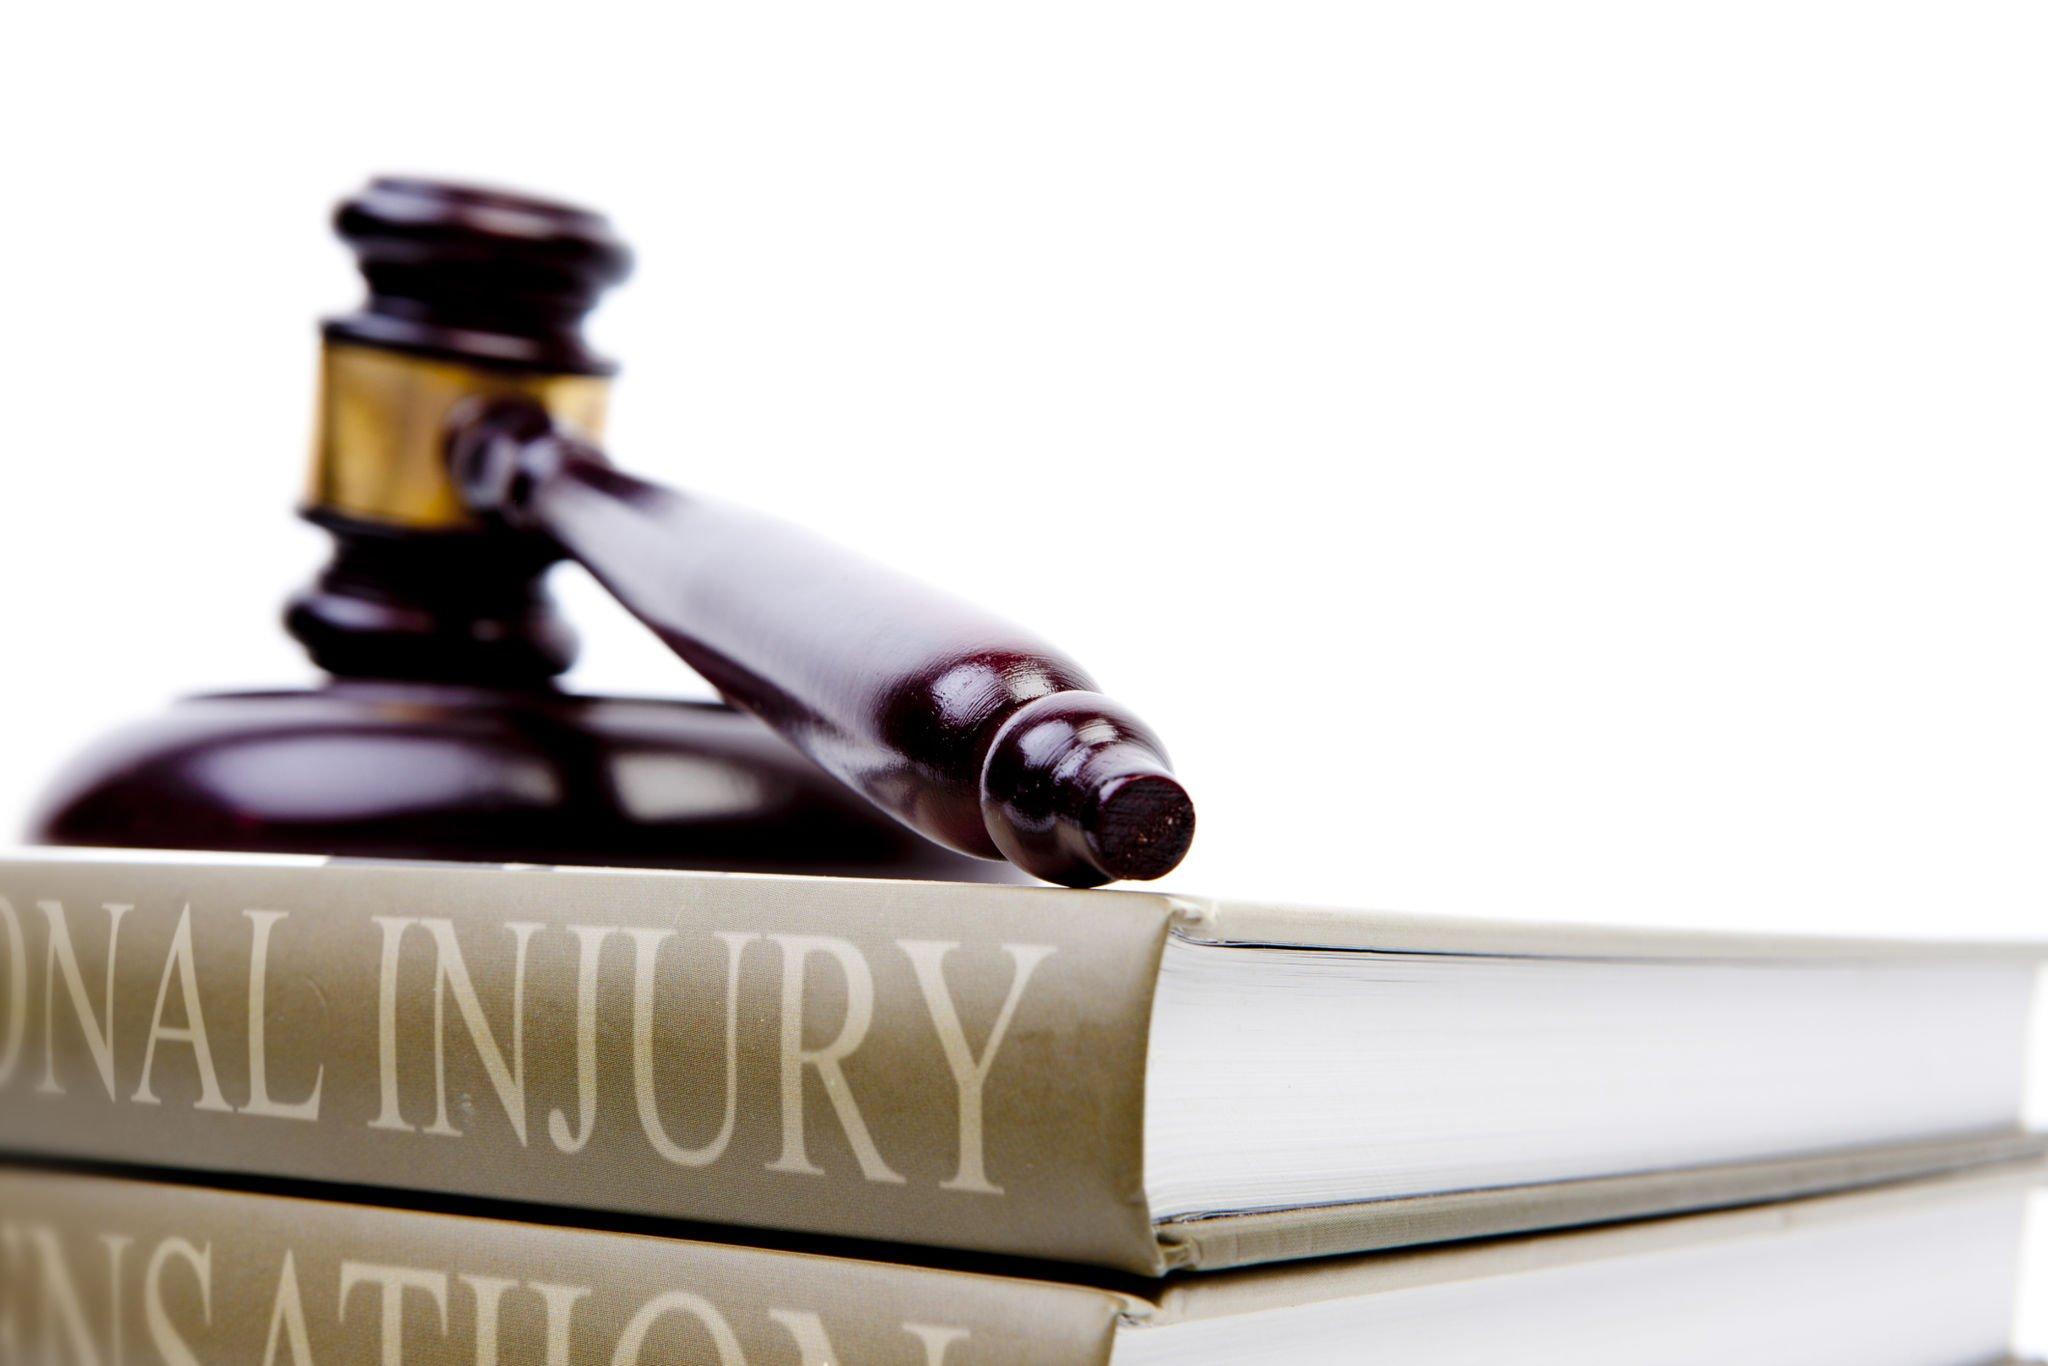 personal injury cases